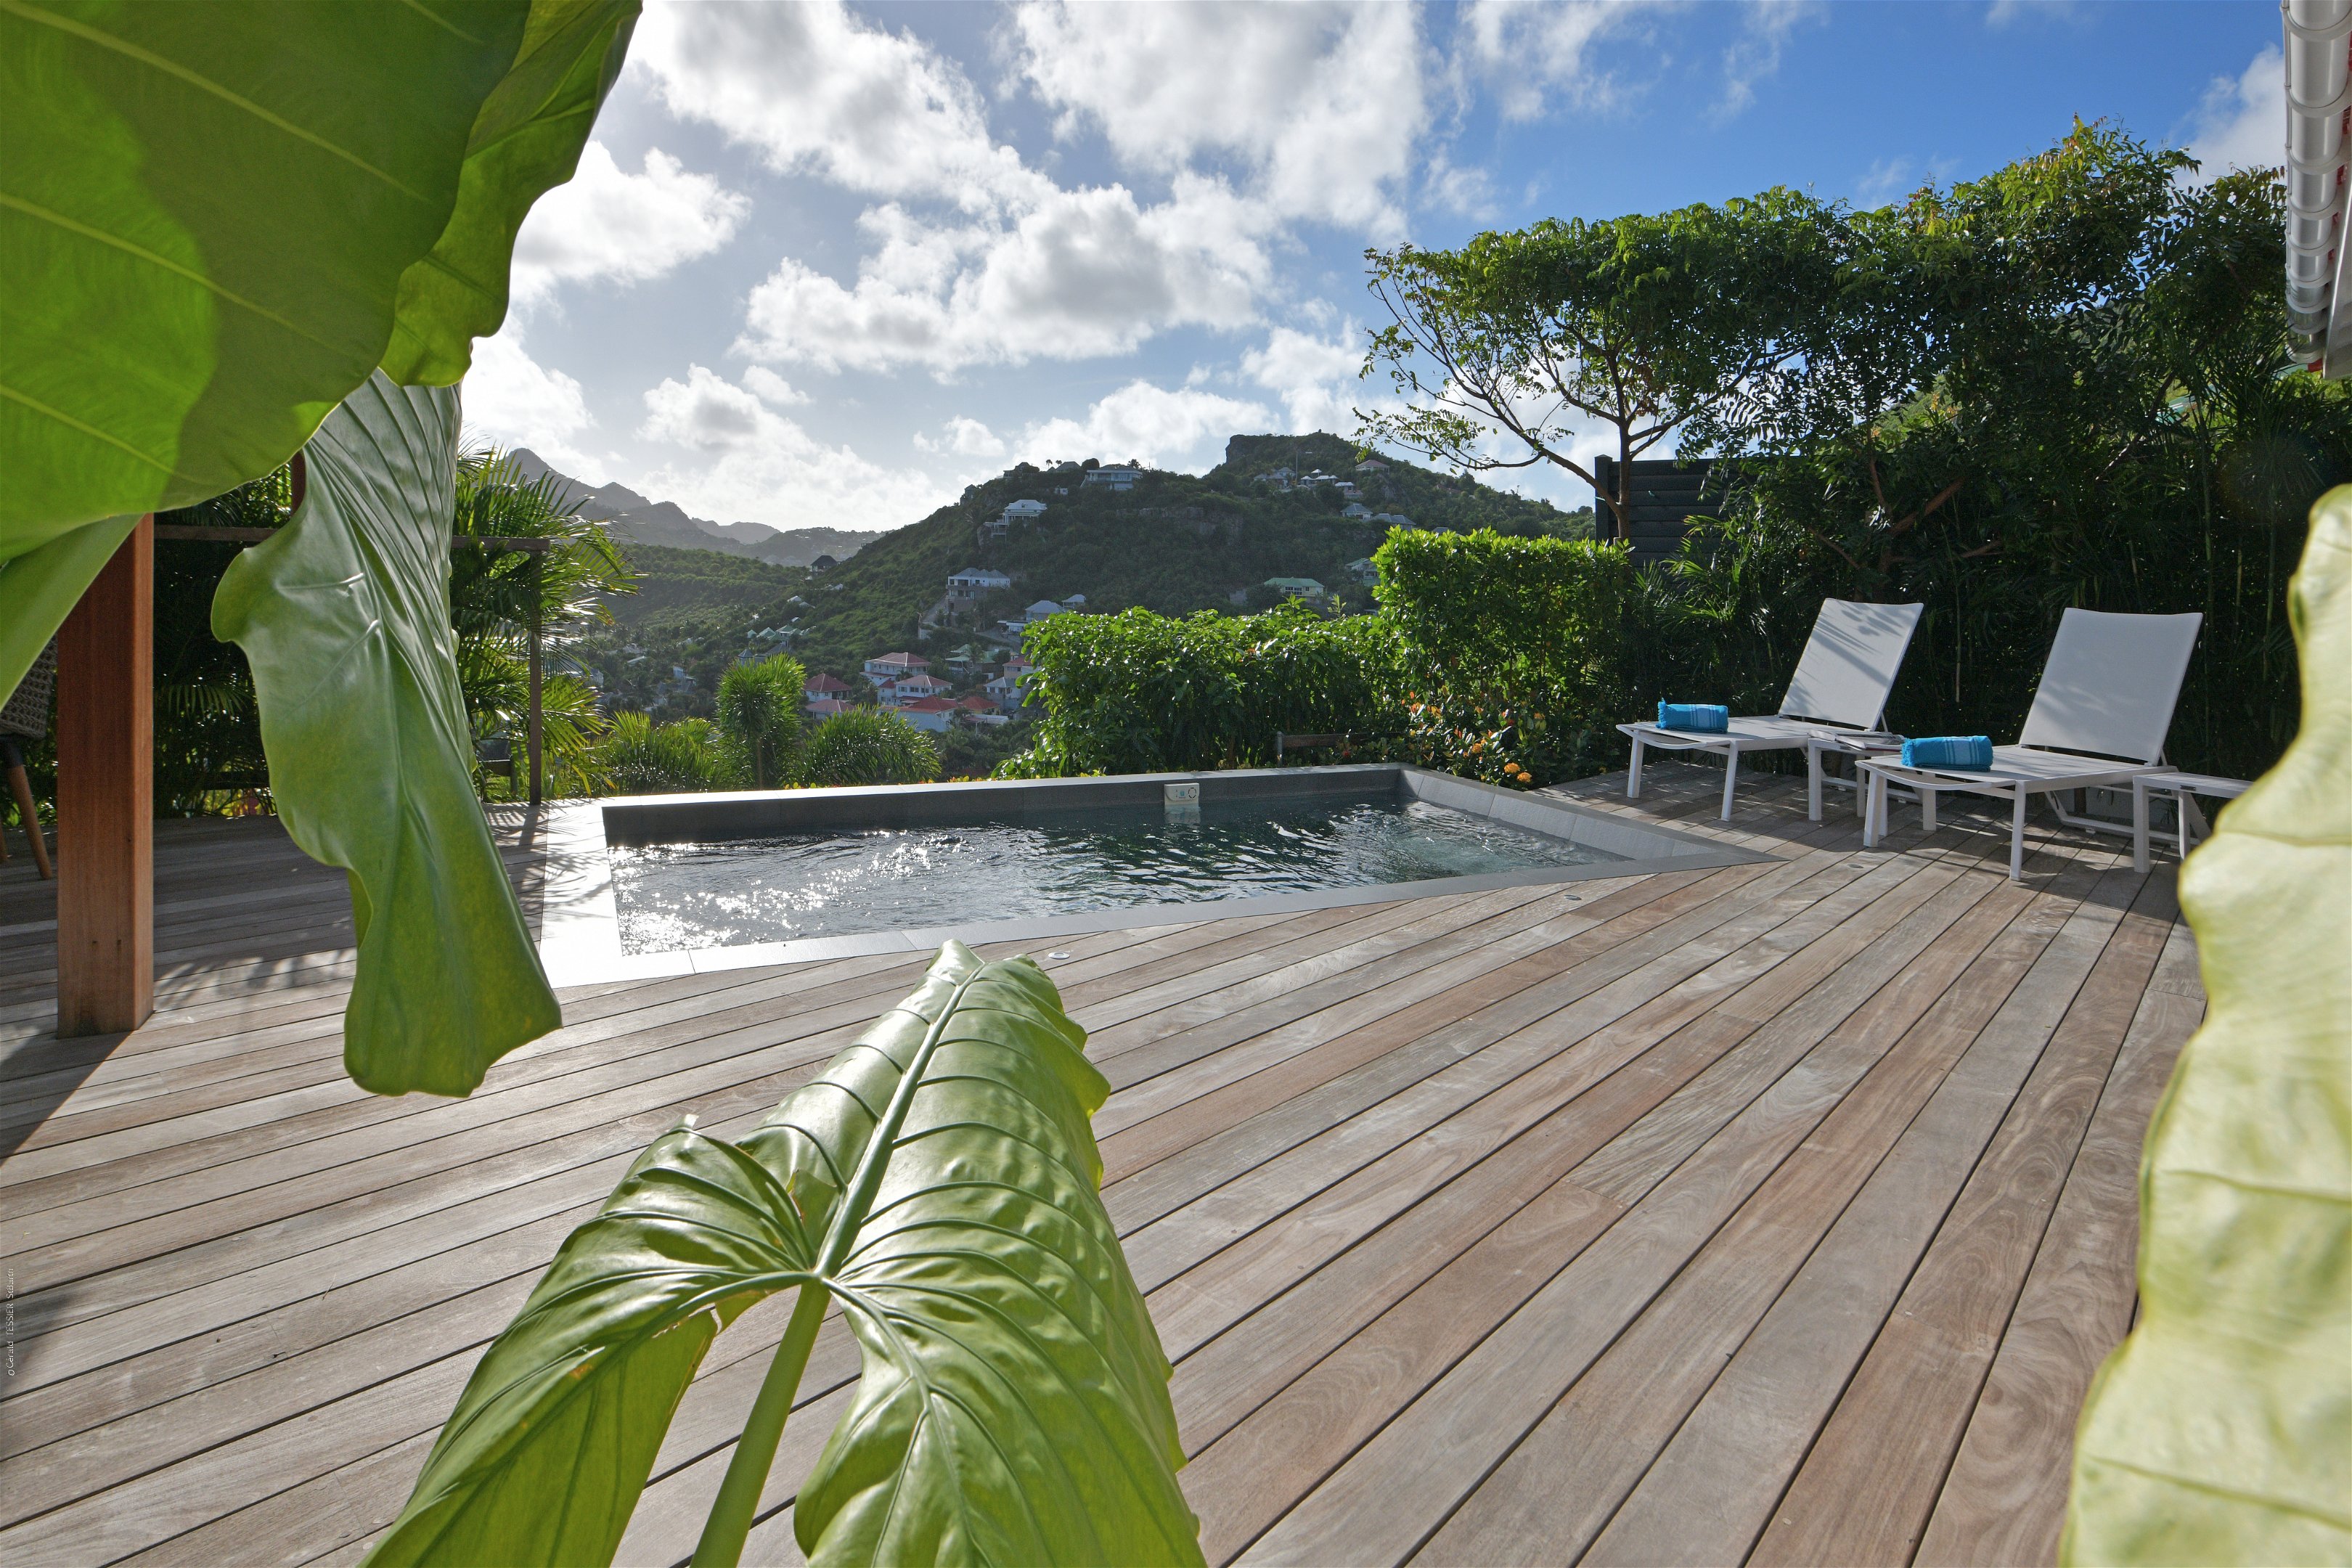 Beautiful pool facing the panoramic views, nice terrace with deckchairs. Gas barbecue. 